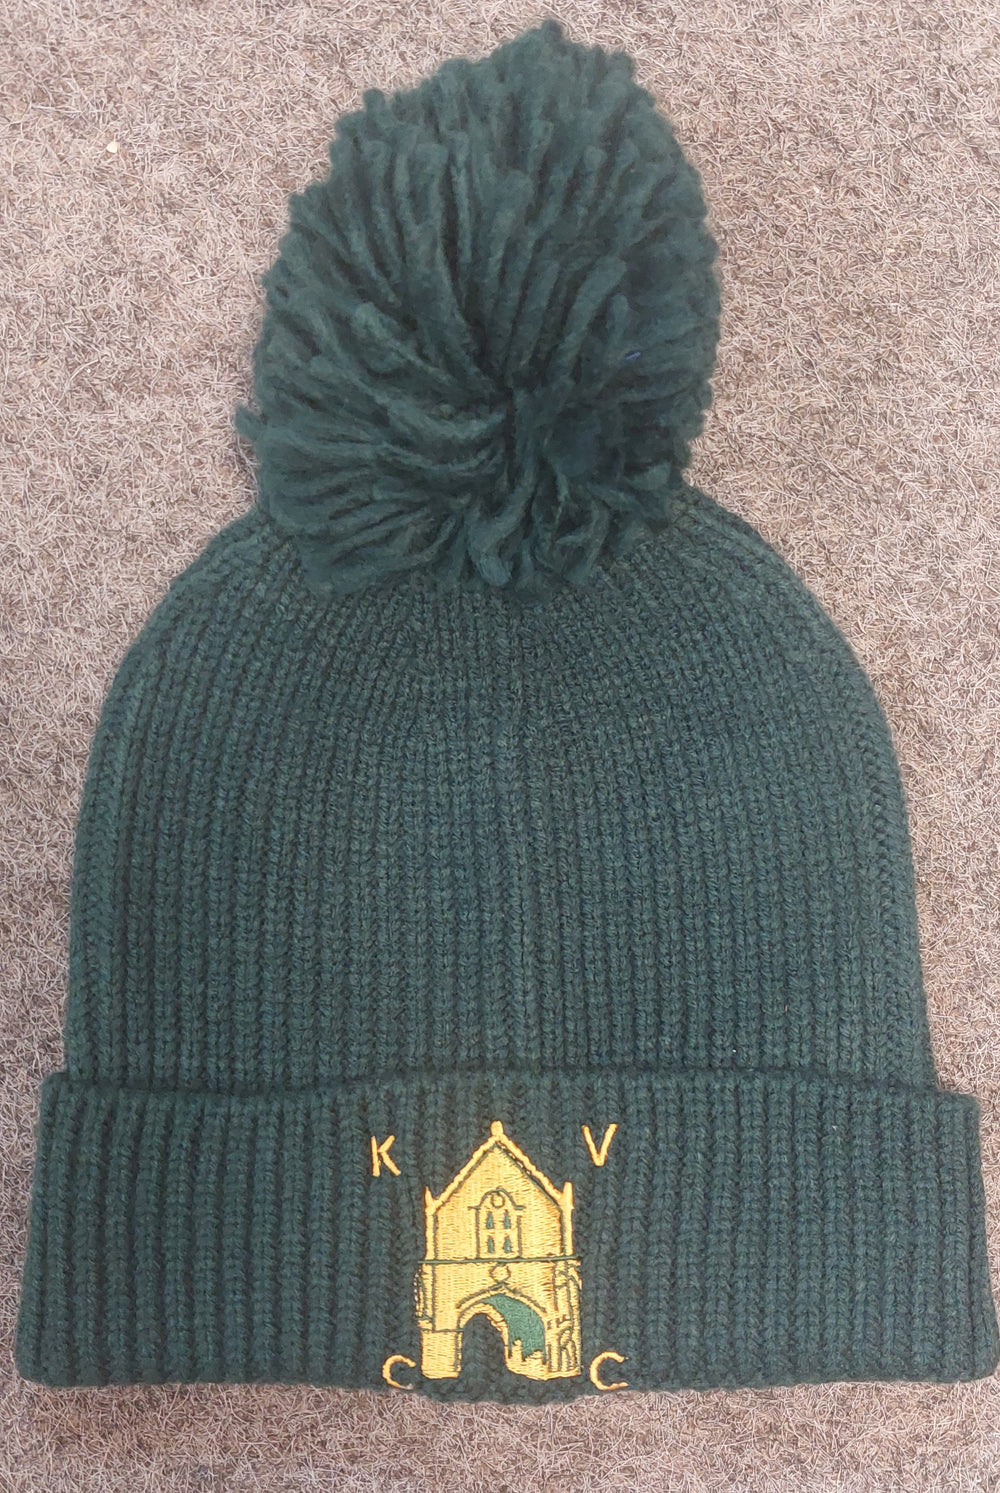 Kingswood Village CC Knit Ribbed Beanie